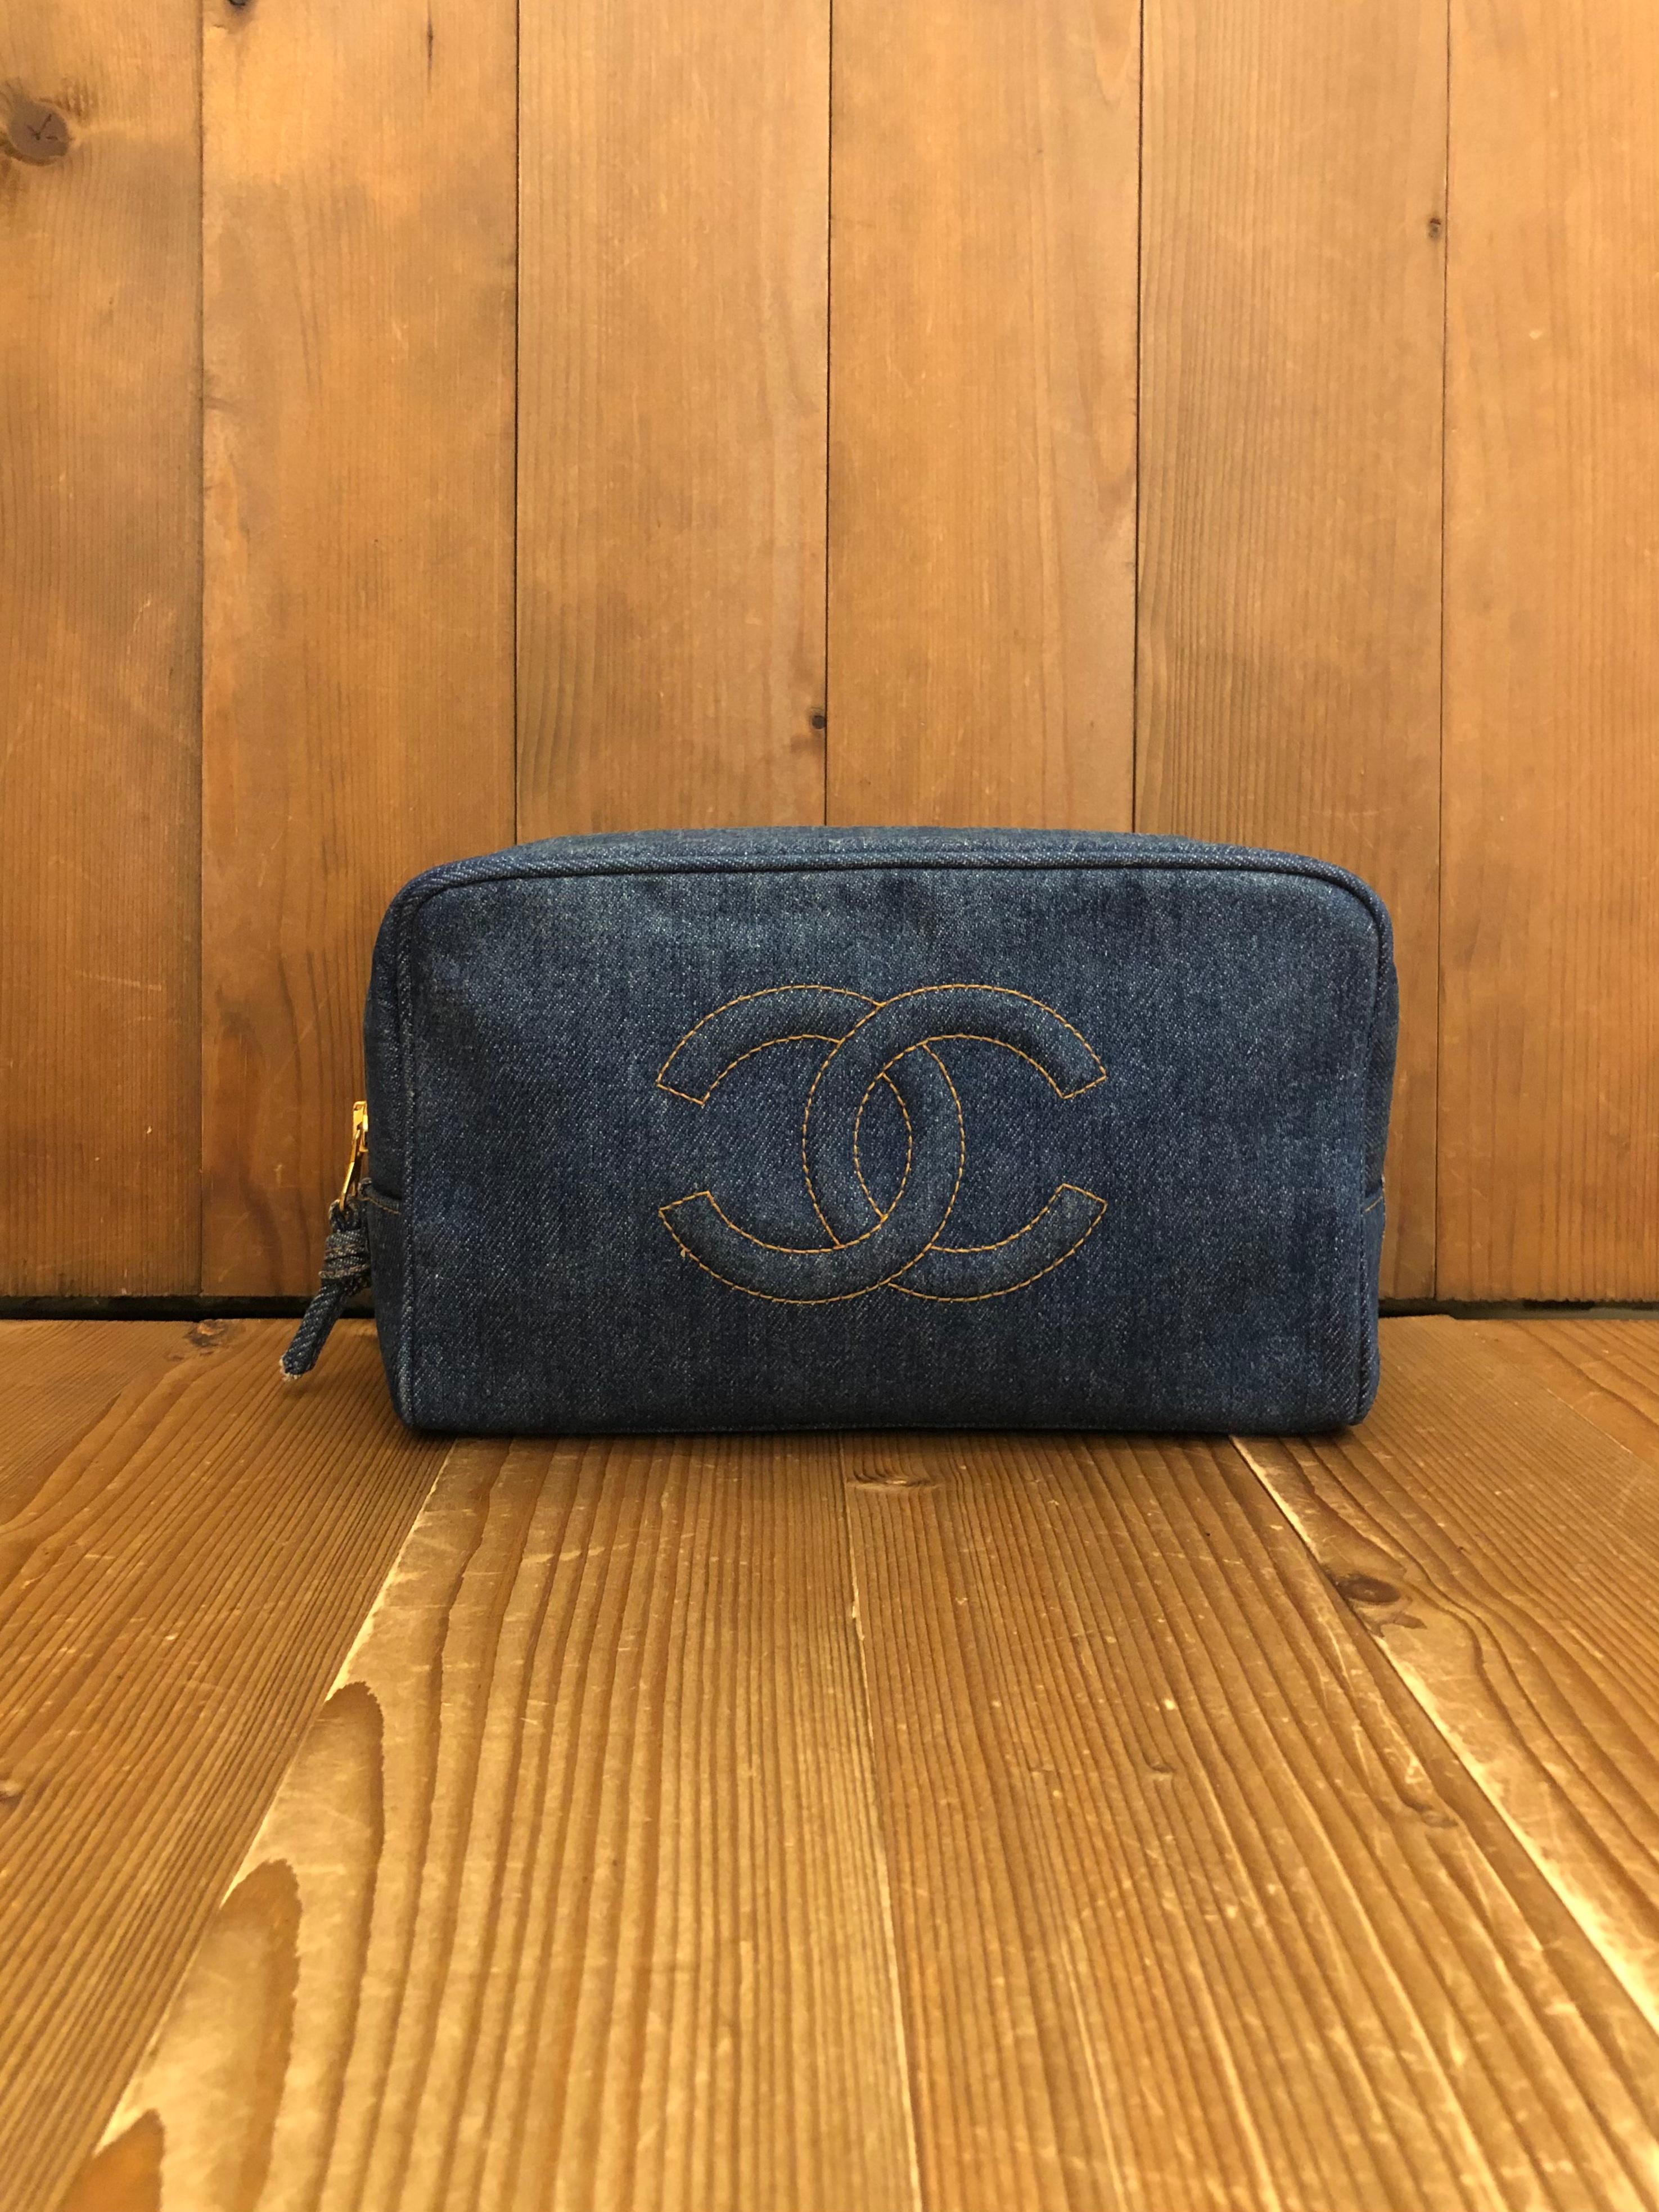 This vintage Chanel cosmetic pouch bag is crafted of denim in blue. Zip around closure opens to a black leather interior featuring a zippered pocket and elastic bands. Made in Italy. Serial no 4xxxxxx (1995 - 1997). Measures approximately 9 x 5.75 x